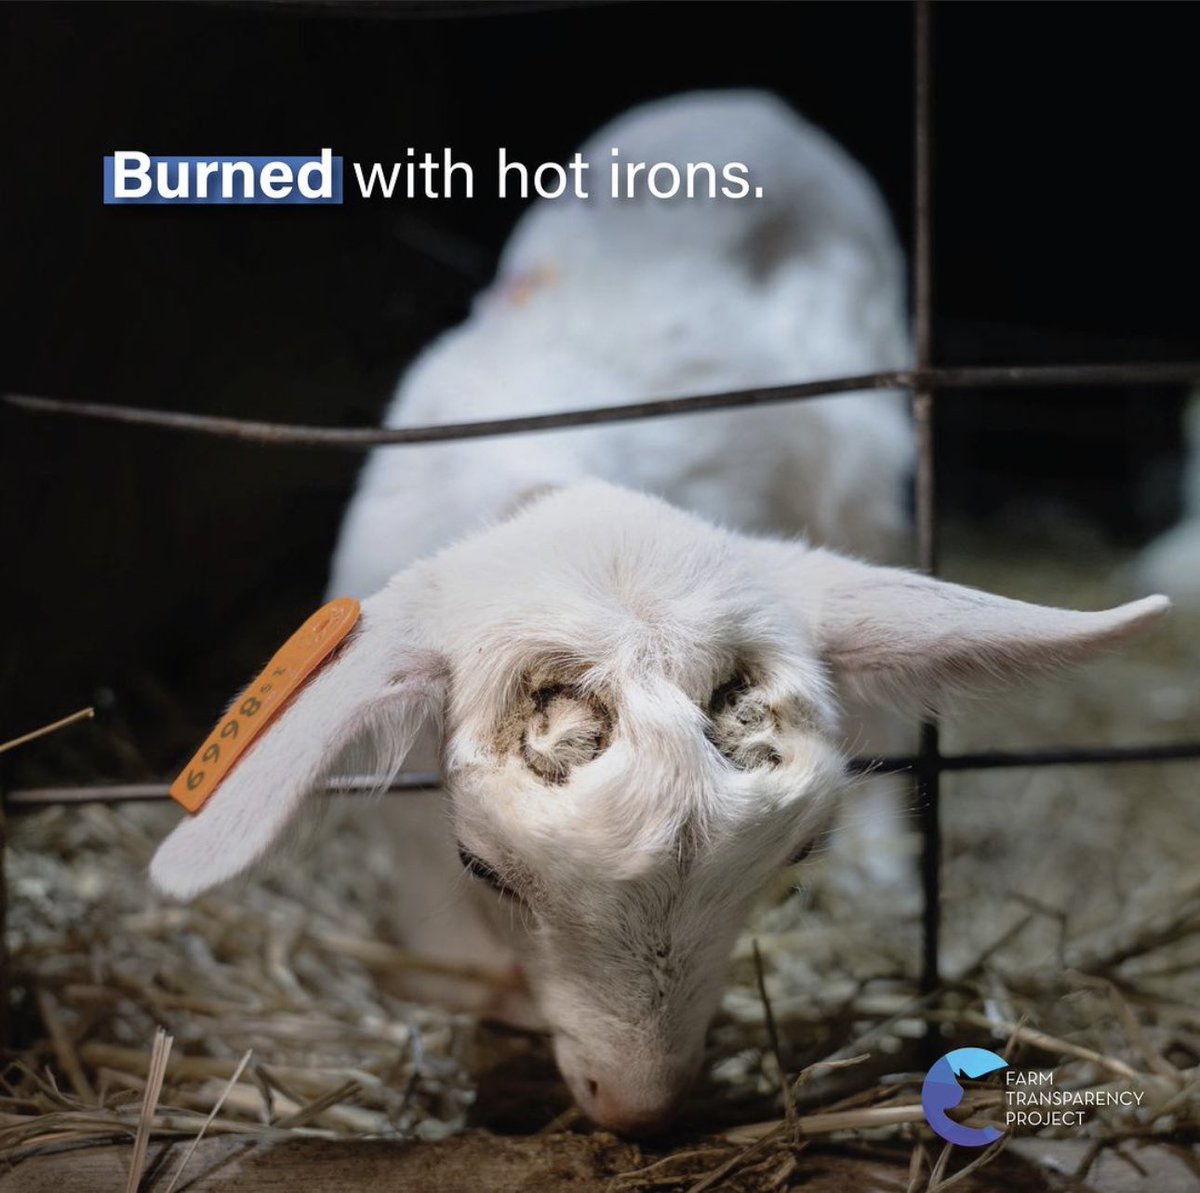 🩸MEAT FARMING #DairyIndustry 

Animal exploiters should no longer be able to operate in secrecy with legal immunity.Despite investigations, the real problem is LEGALIZED, SYSTEMATIC ABUSE OF ANIMALS.

Goats' growing buds burn off with hot irons.  #FactoryFarms #AnimalCruelty🔻